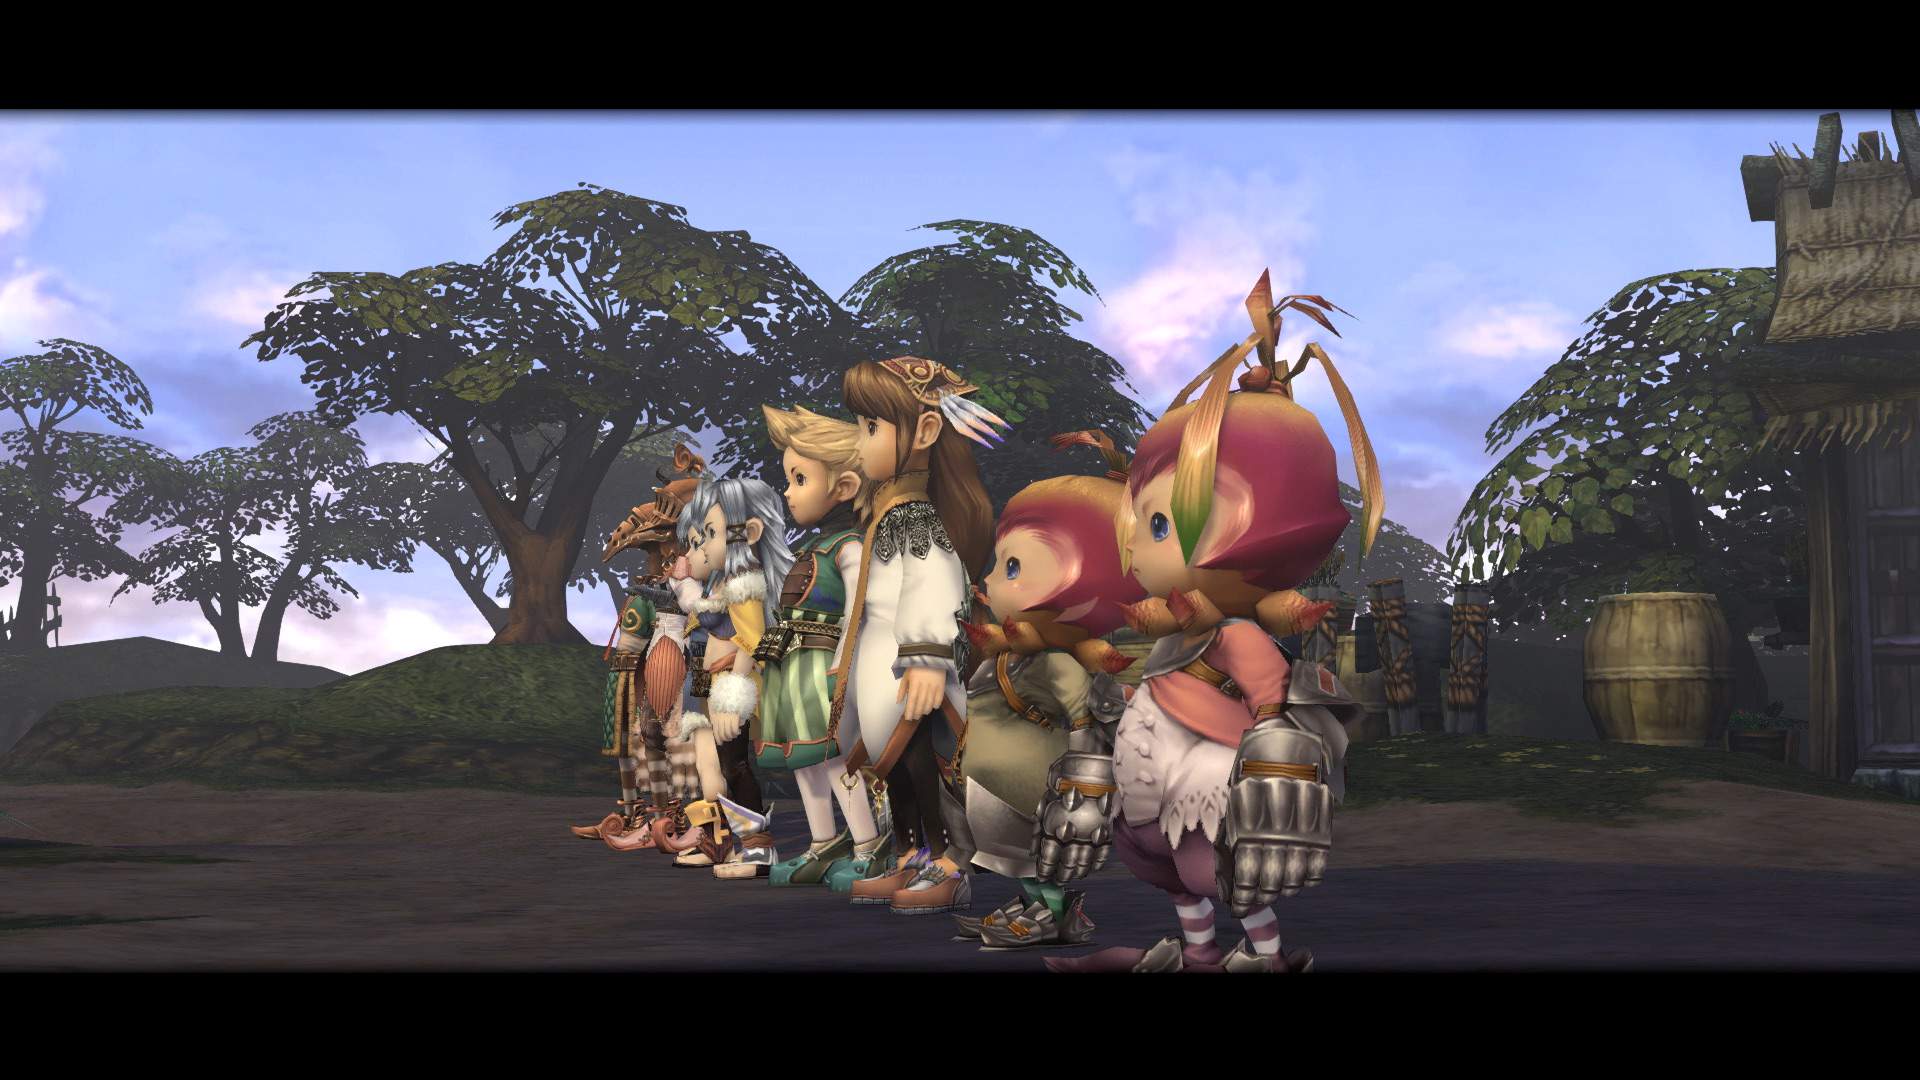 FINAL FANTASY CRYSTAL CHRONICLES Remastered Edition | Square Enix Blog